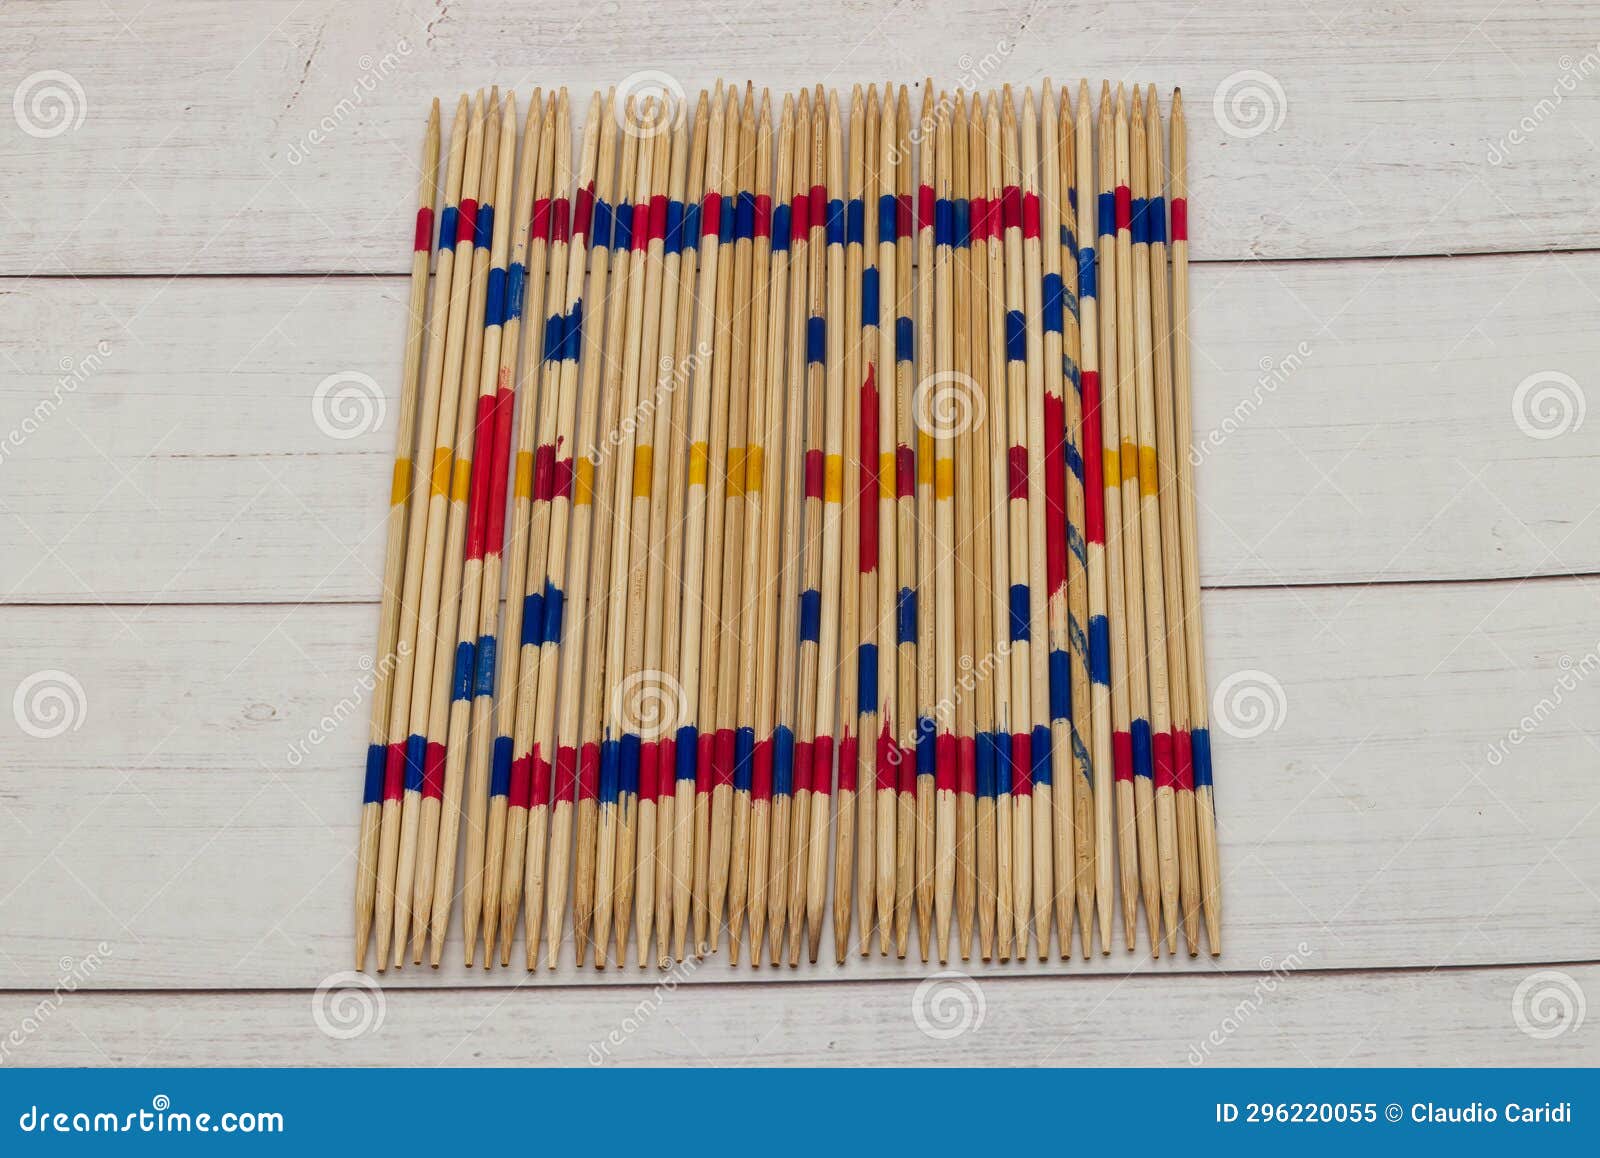 Oriental Game of Mikado, Shanghai Game. Colored Pick Up Sticks